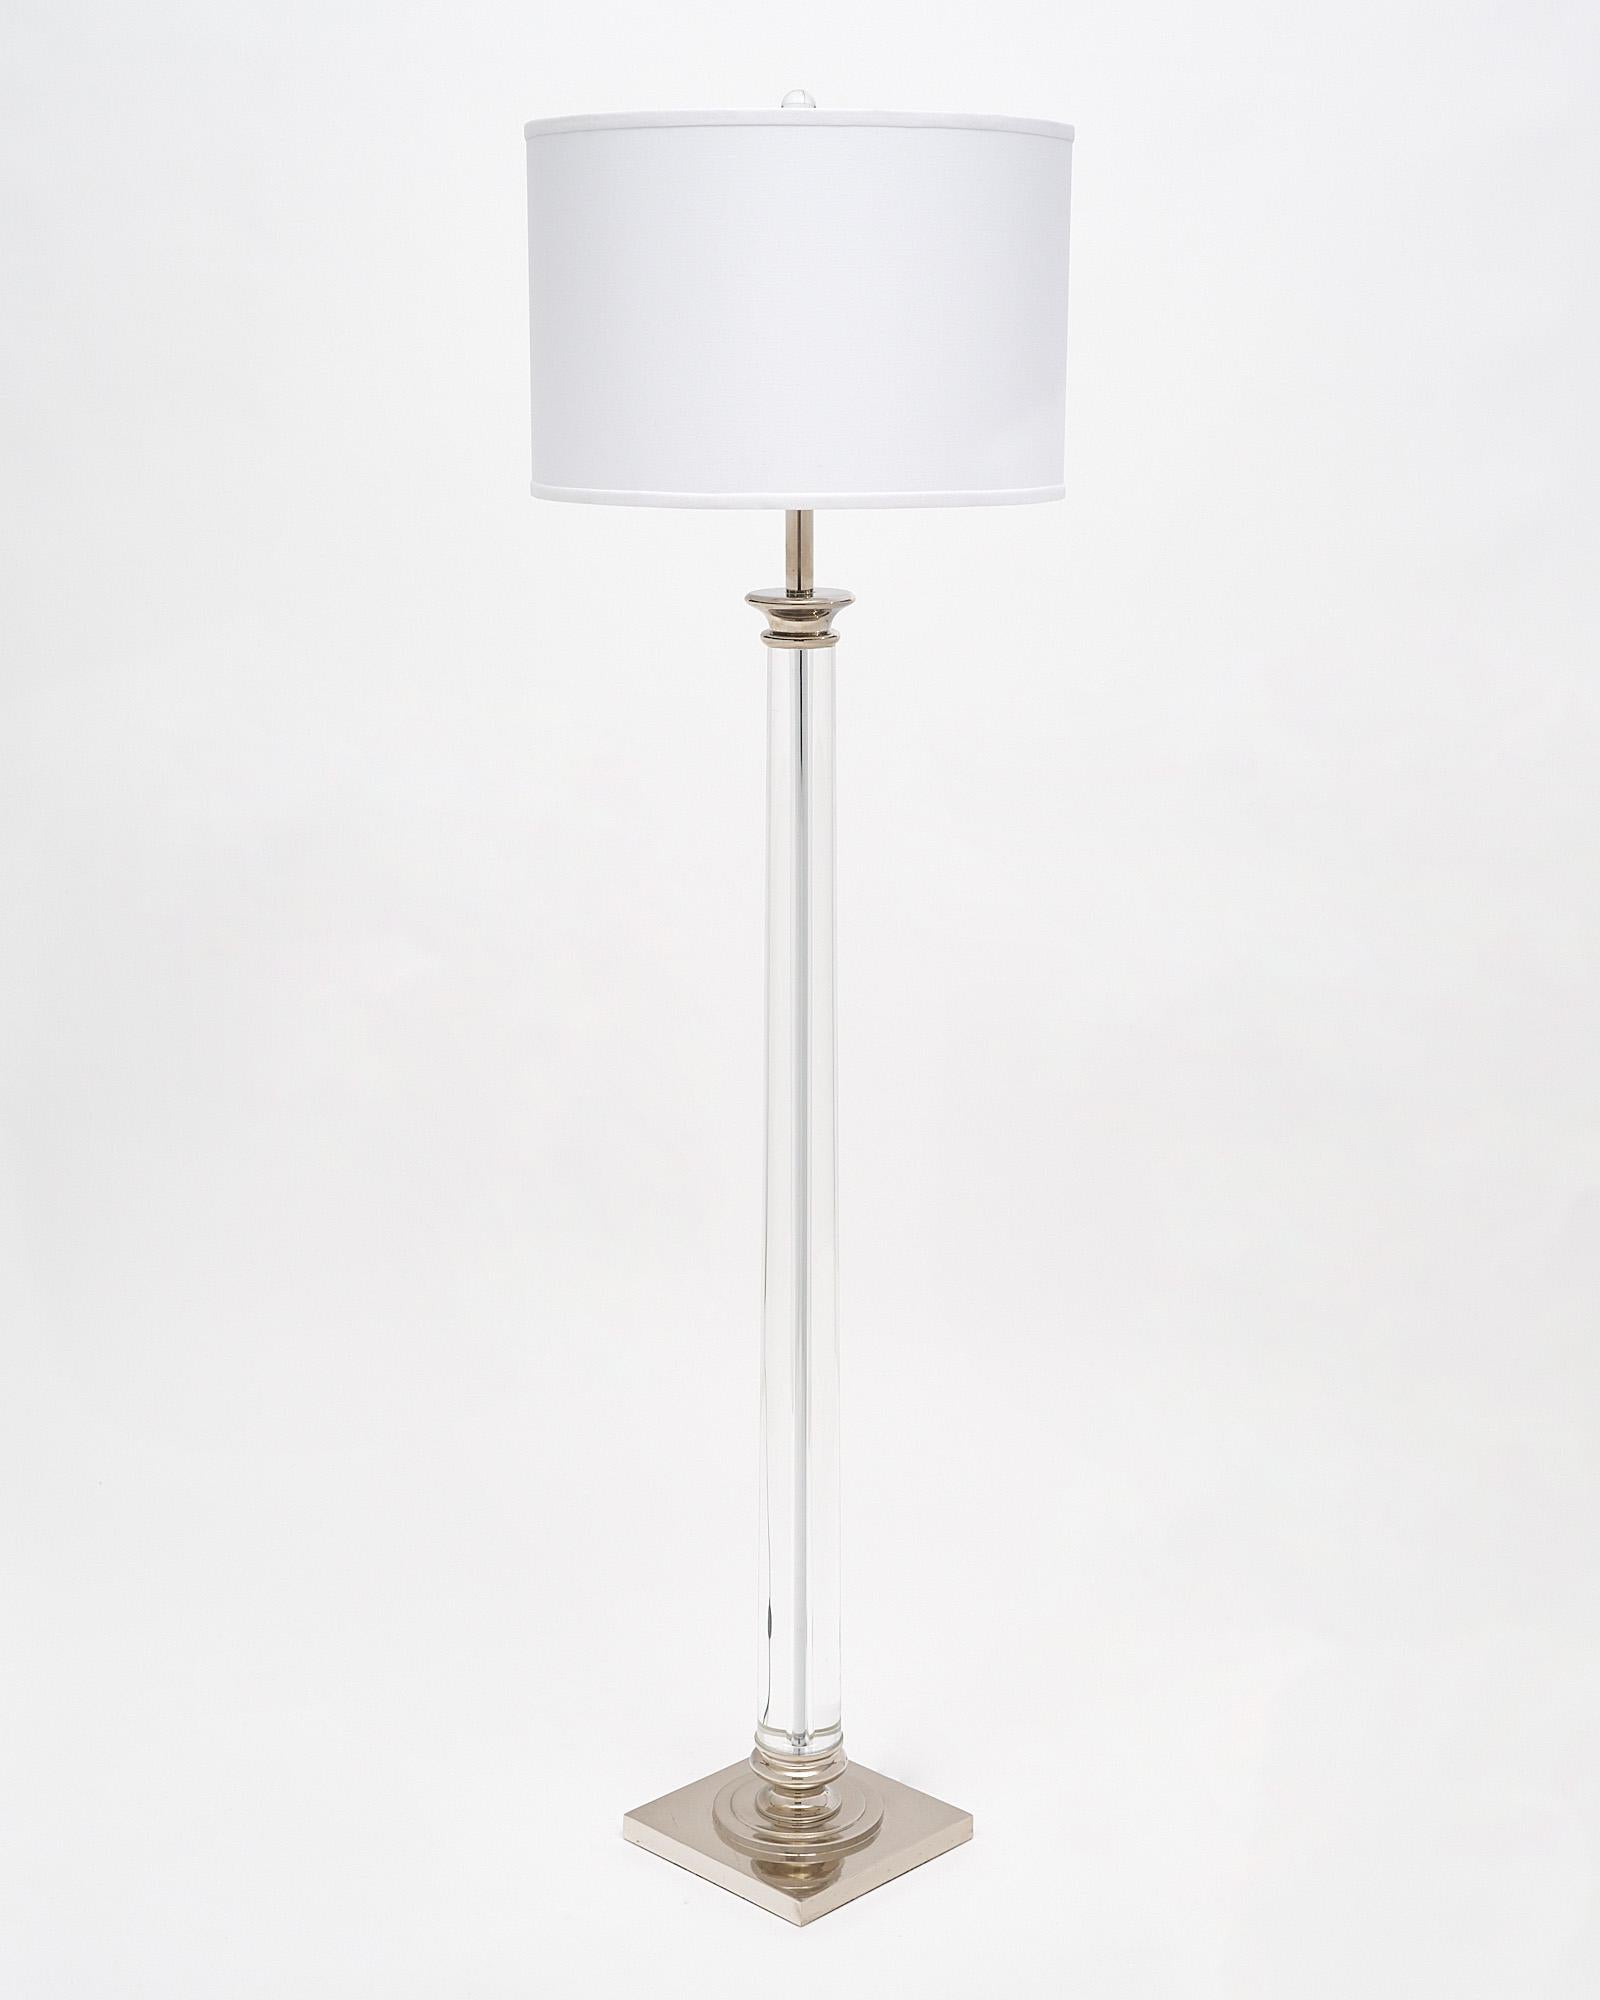 French floor lamp with a glass column structure and a chrome base. It is topped with a glass finial. This piece has been newly wired for US standards.